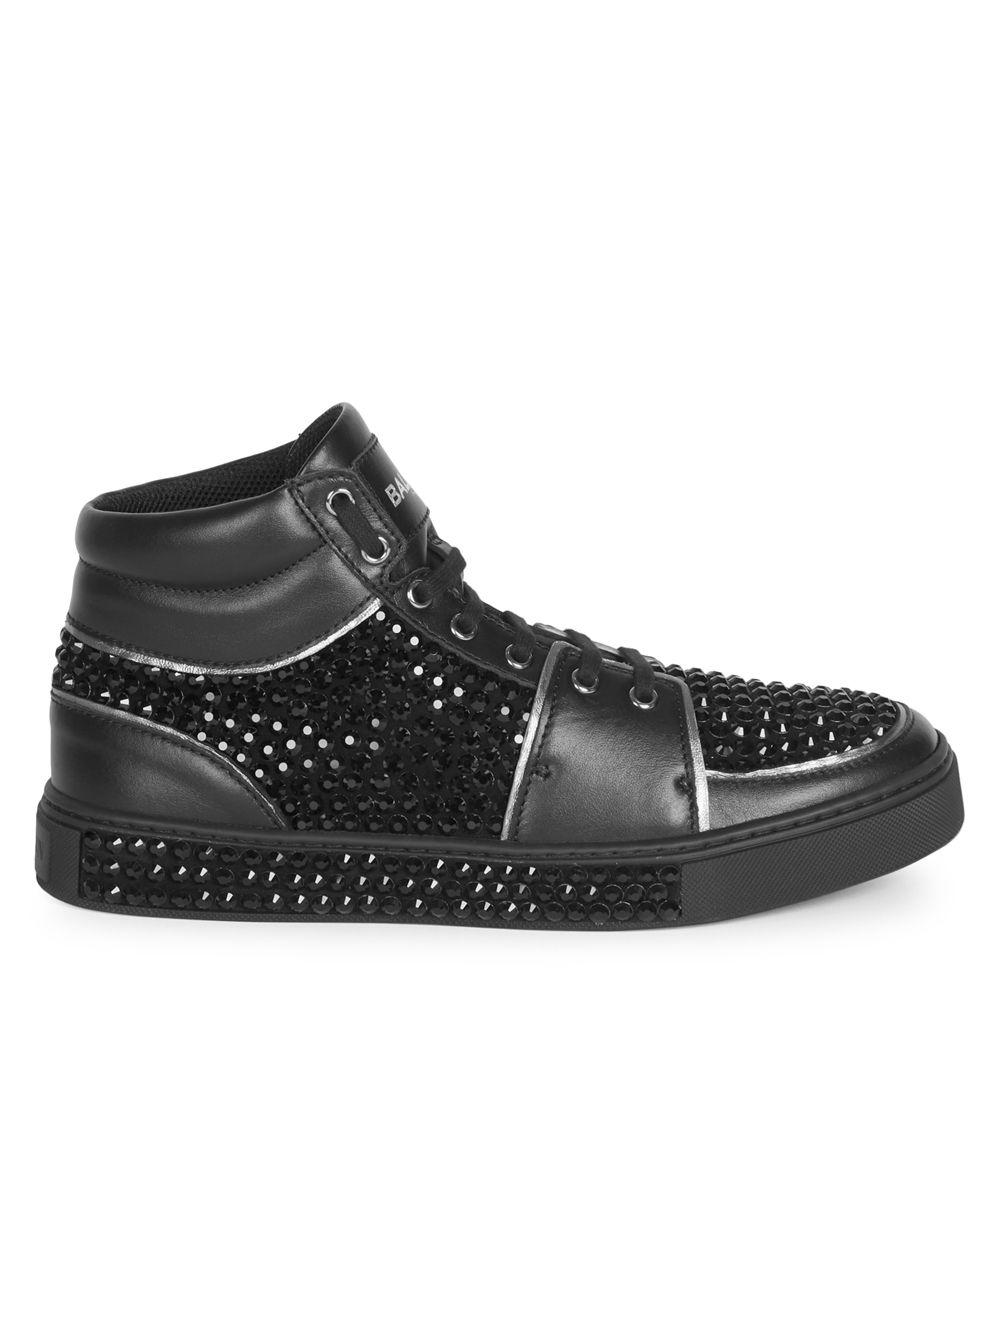 Edgy Elegance: The Studded Sneaker Line by Balmain